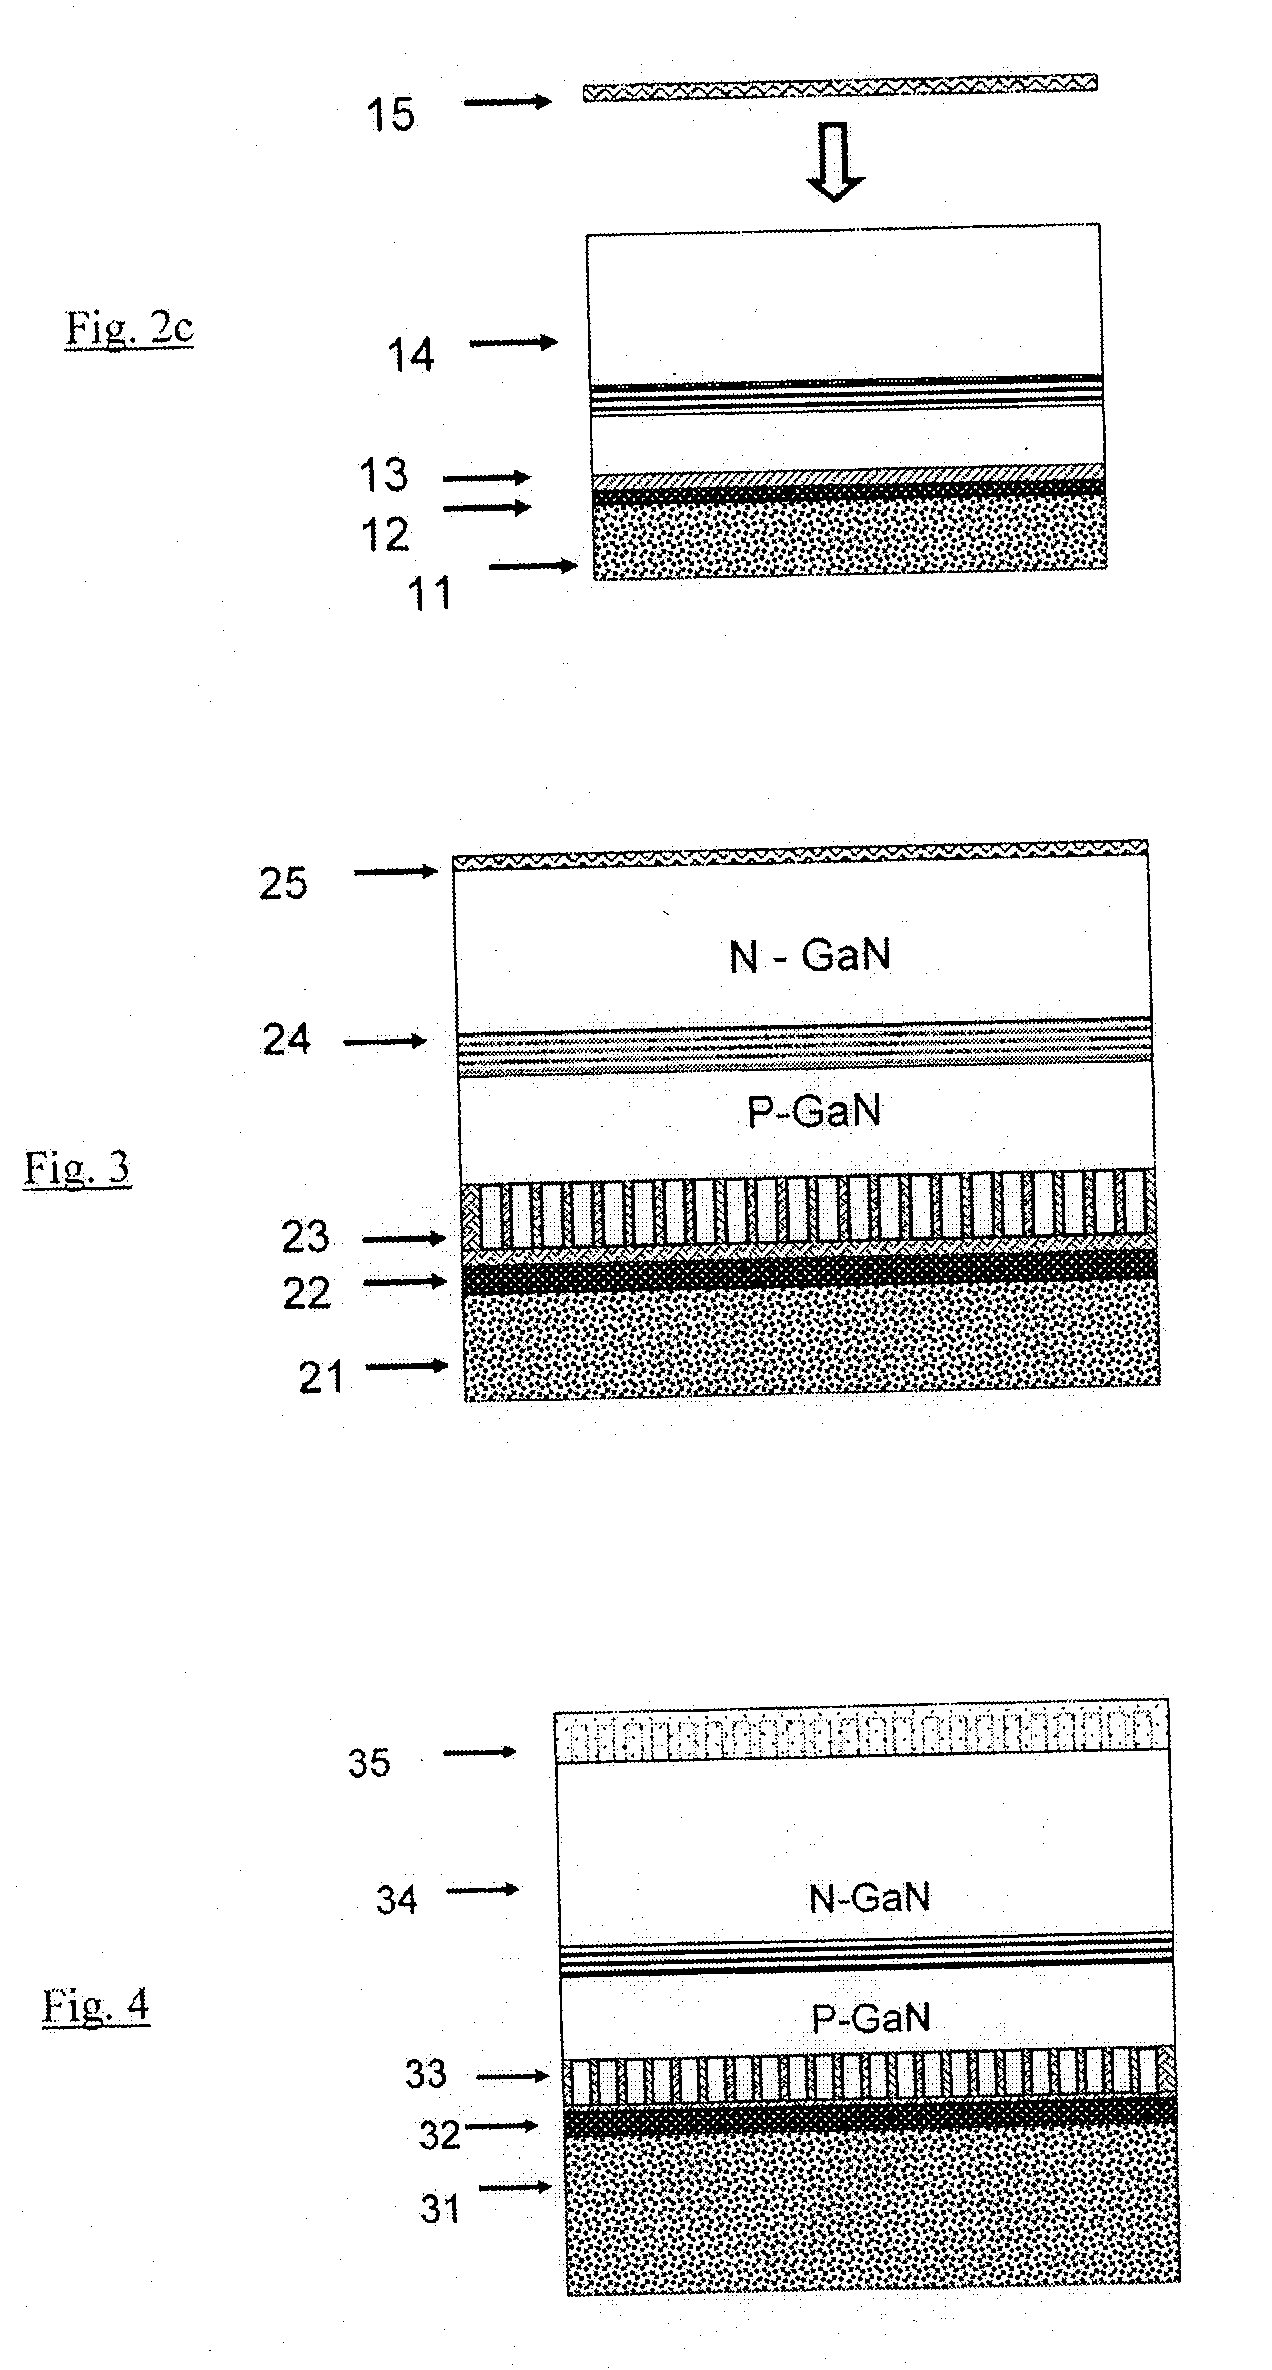 LED chip thermal management and fabrication methods